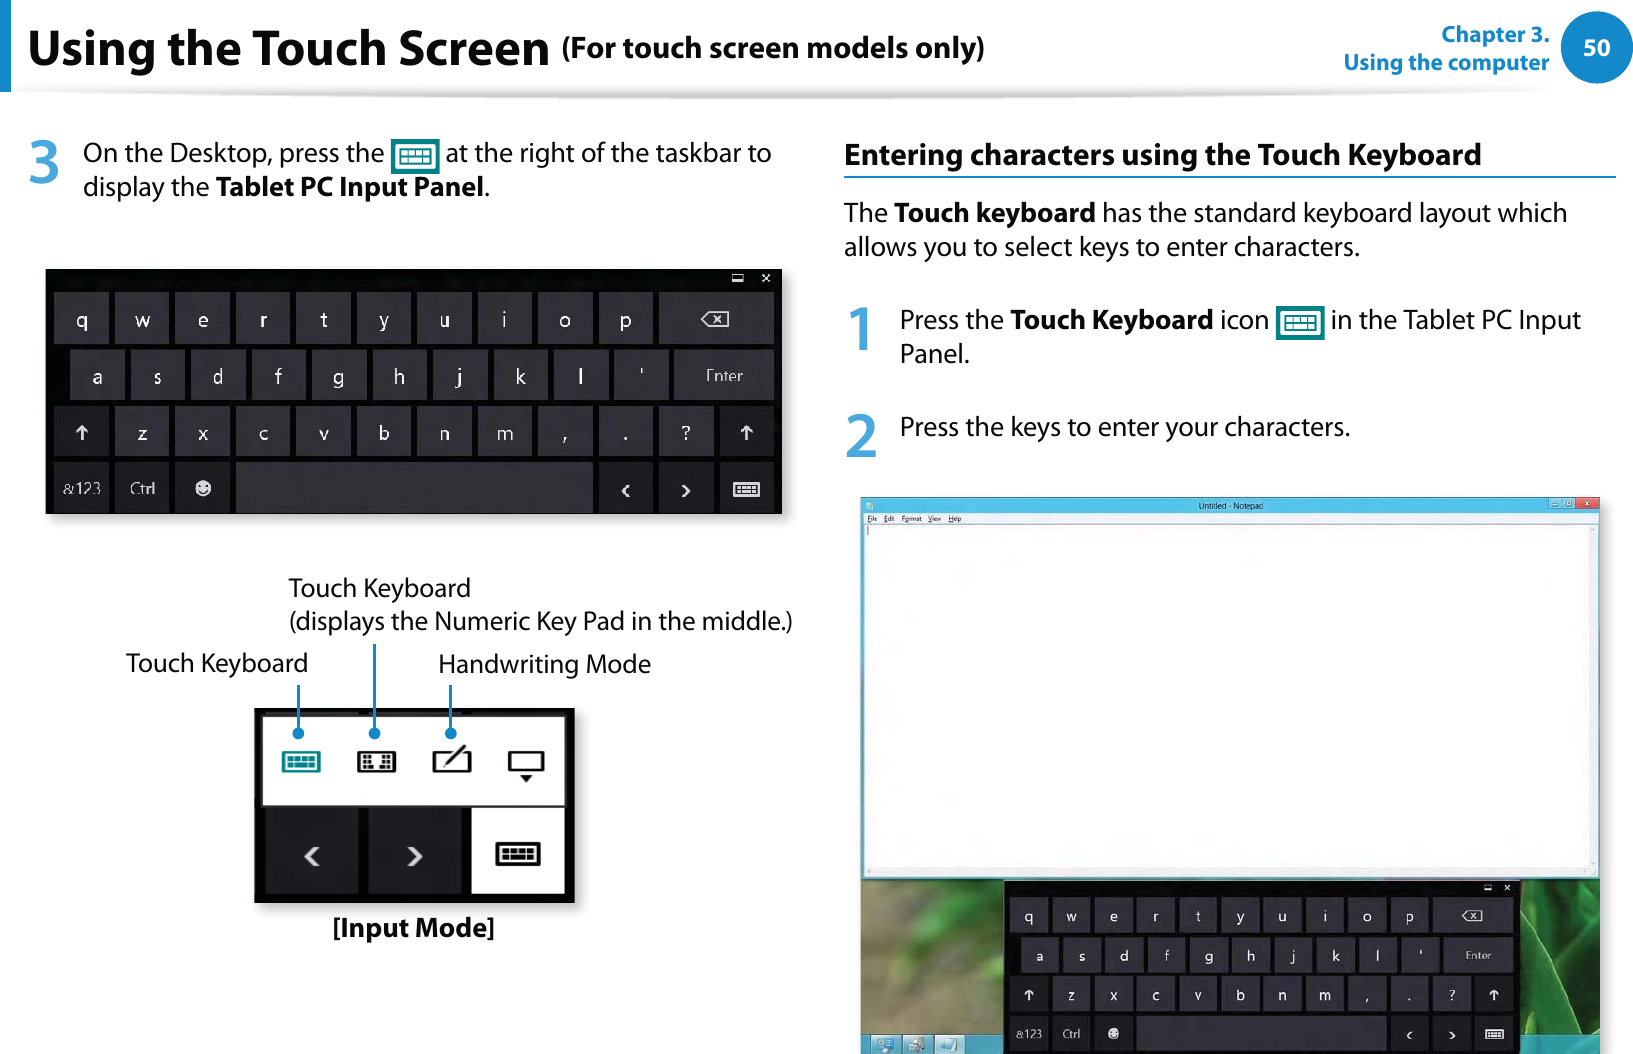 50Chapter 3.  Using the computerUsing the Touch Screen (For touch screen models only)3  On the Desktop, press the   at the right of the taskbar to display the Tablet PC Input Panel.Touch KeyboardTouch Keyboard  (displays the Numeric Key Pad in the middle.)Handwriting Mode[Input Mode]Entering characters using the Touch KeyboardThe Touch keyboard has the standard keyboard layout which allows you to select keys to enter characters.1 Press the Touch Keyboard icon   in the Tablet PC Input Panel.2  Press the keys to enter your characters.